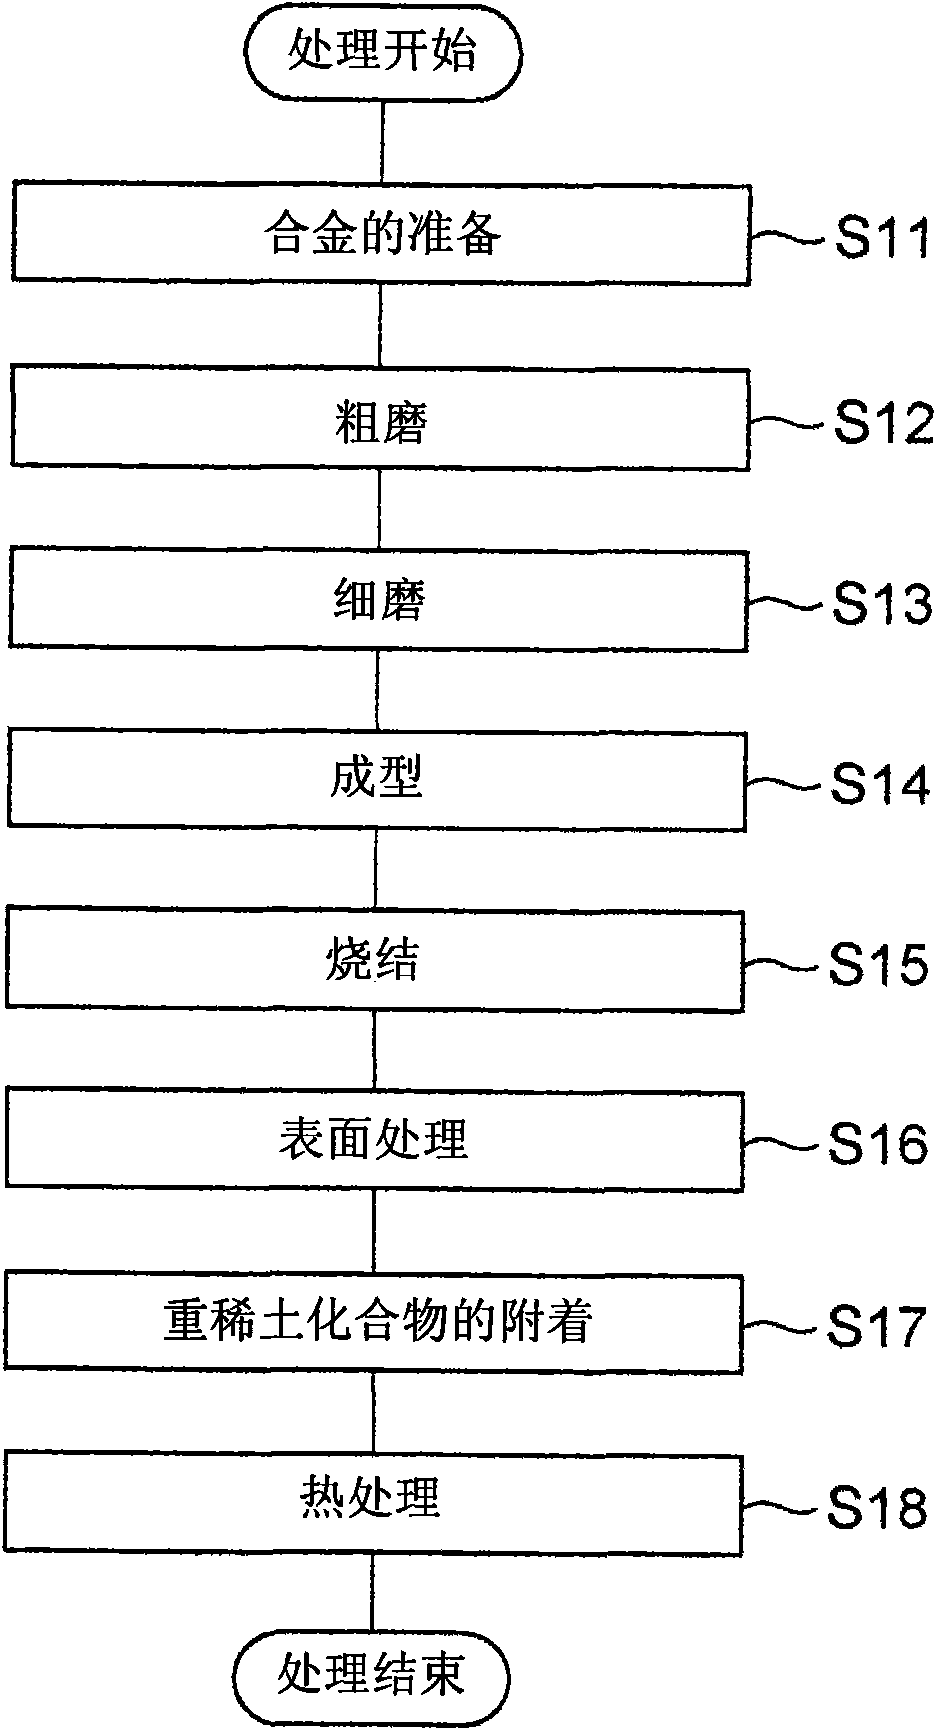 Process for producing magnet